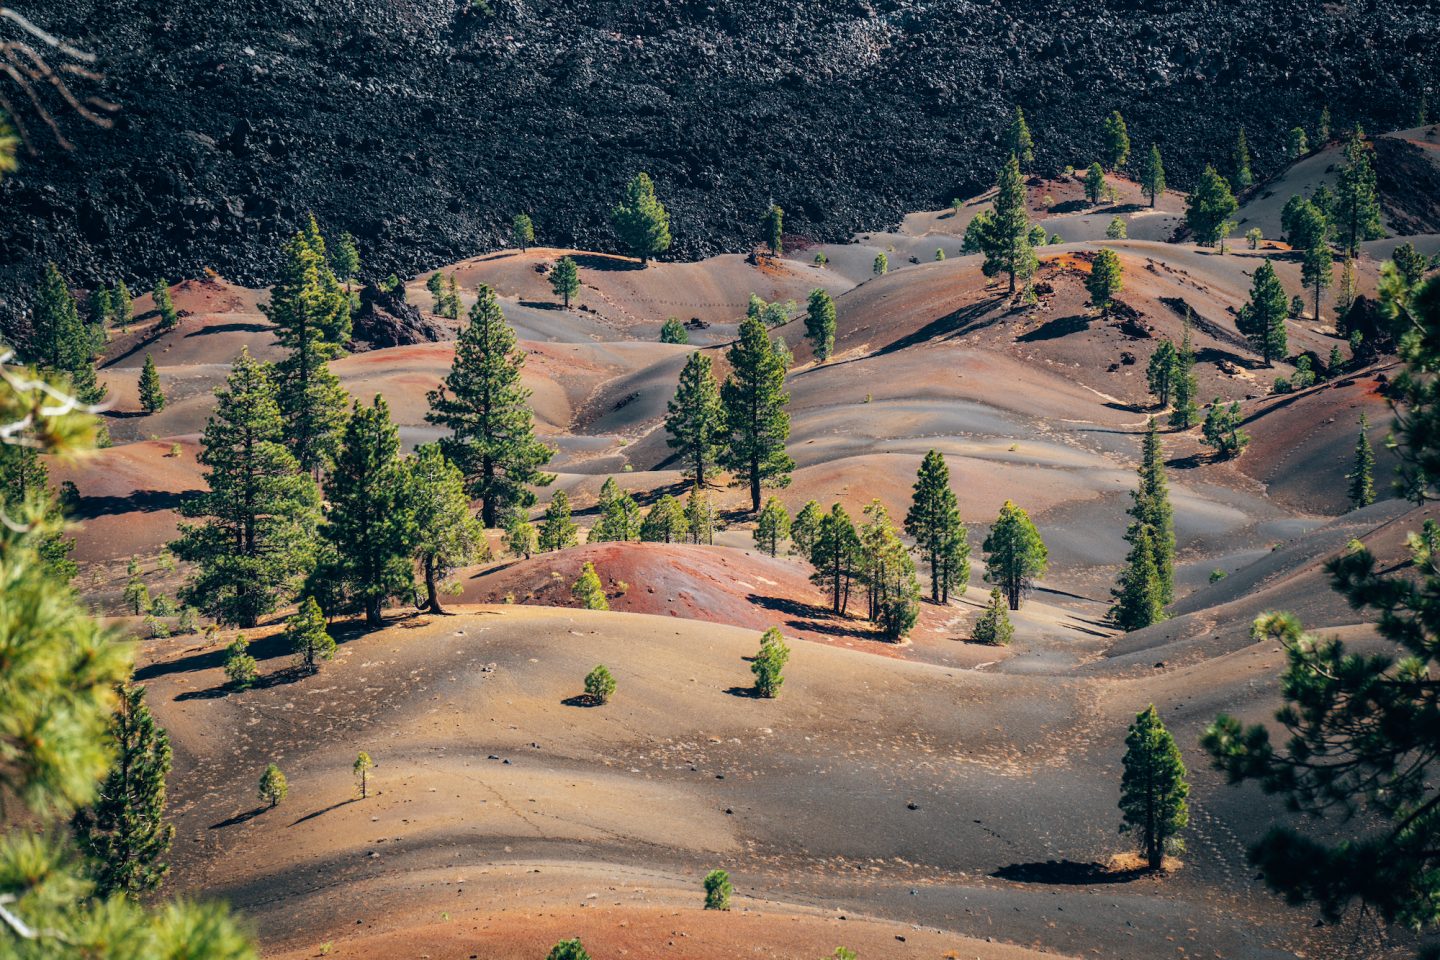 Painted Dunes from Cinder Cone Volcano